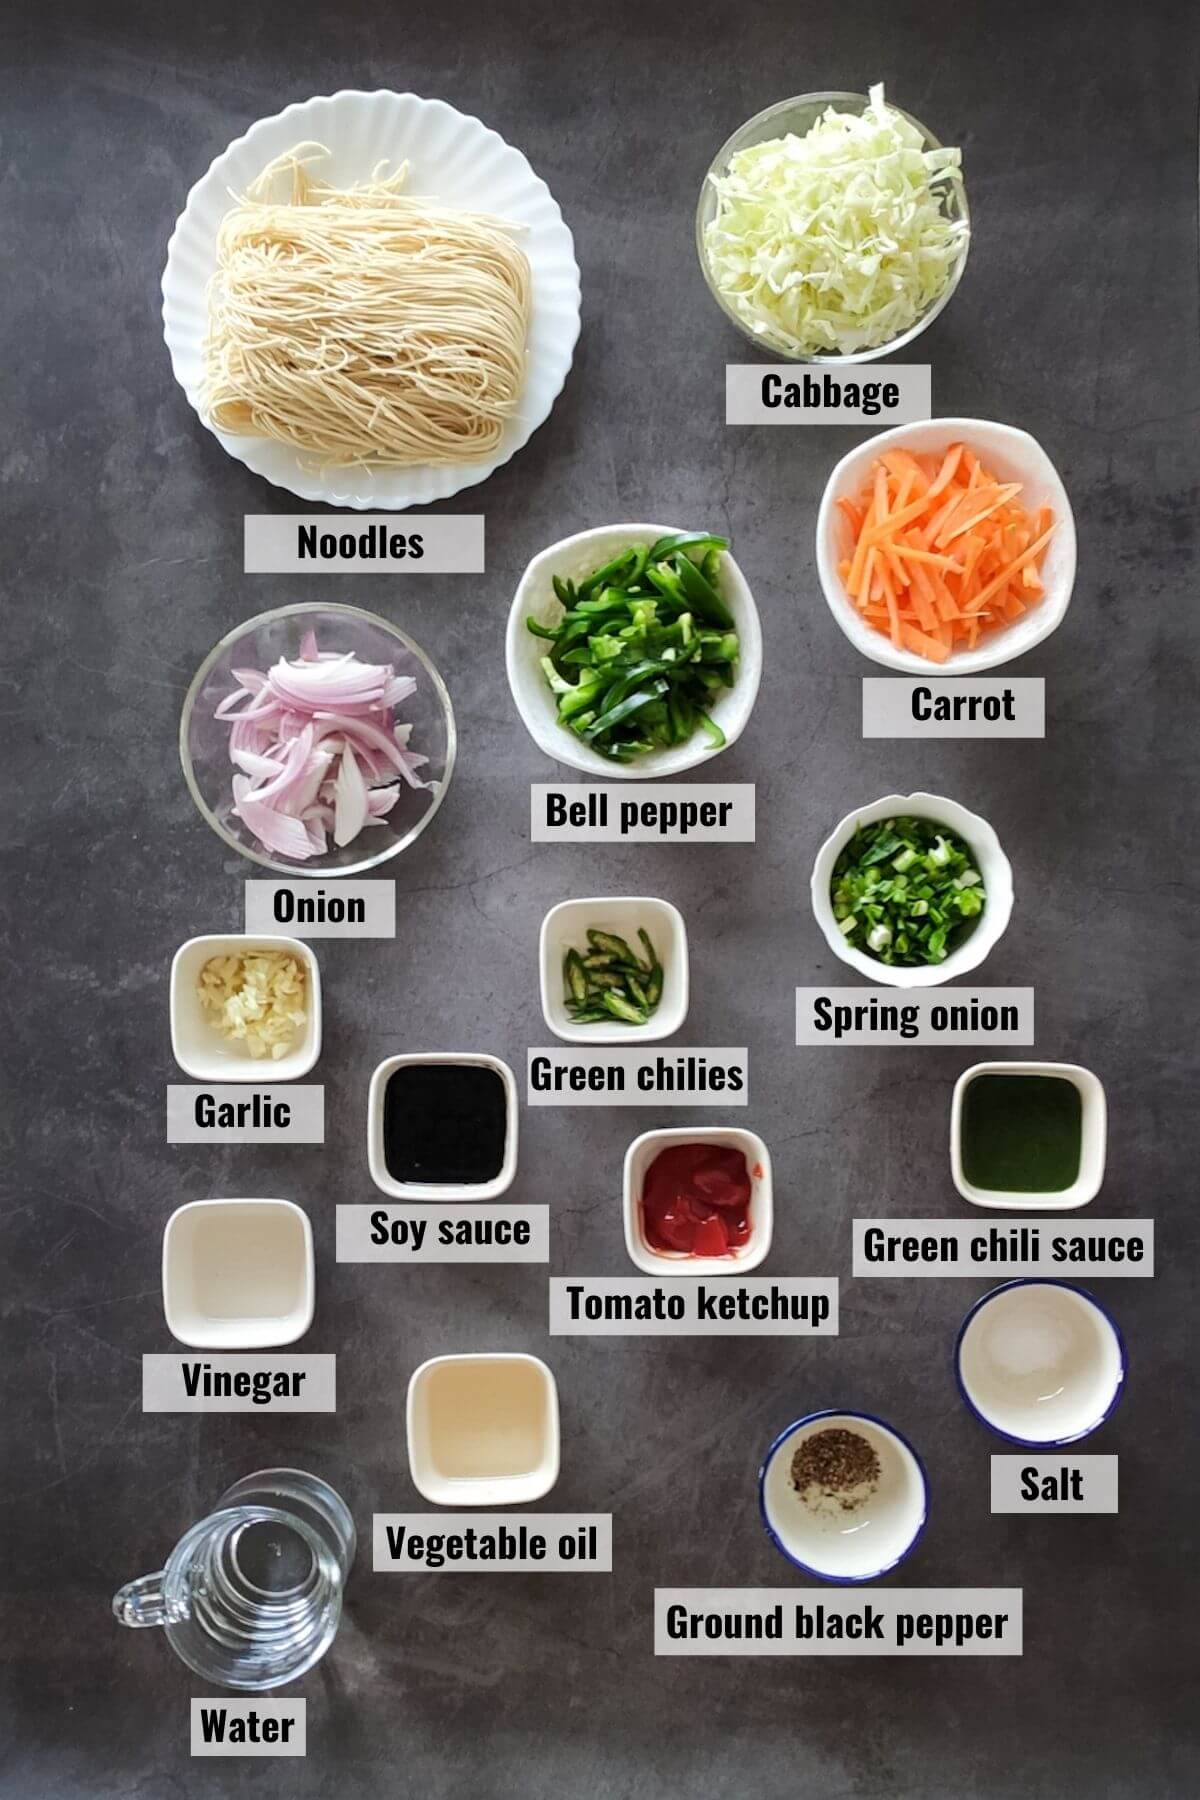 Ingredients required for making vegetable chow mein at home.